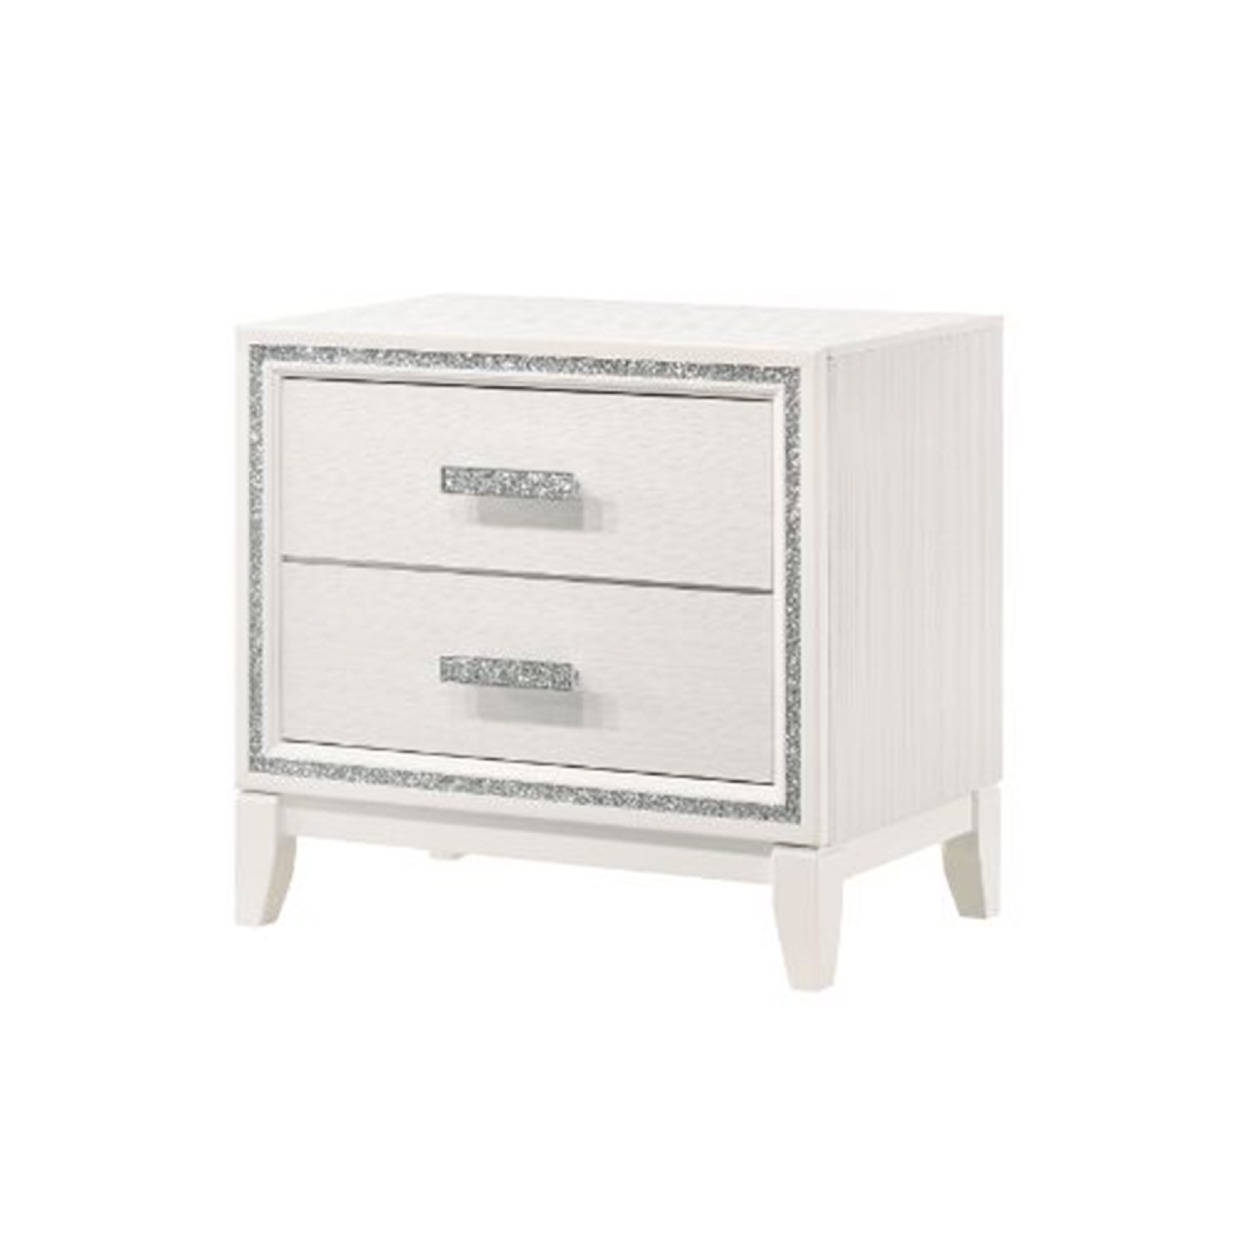 Nightstand With 2 Drawers And Shimmer Accent Trim, White- Saltoro Sherpi